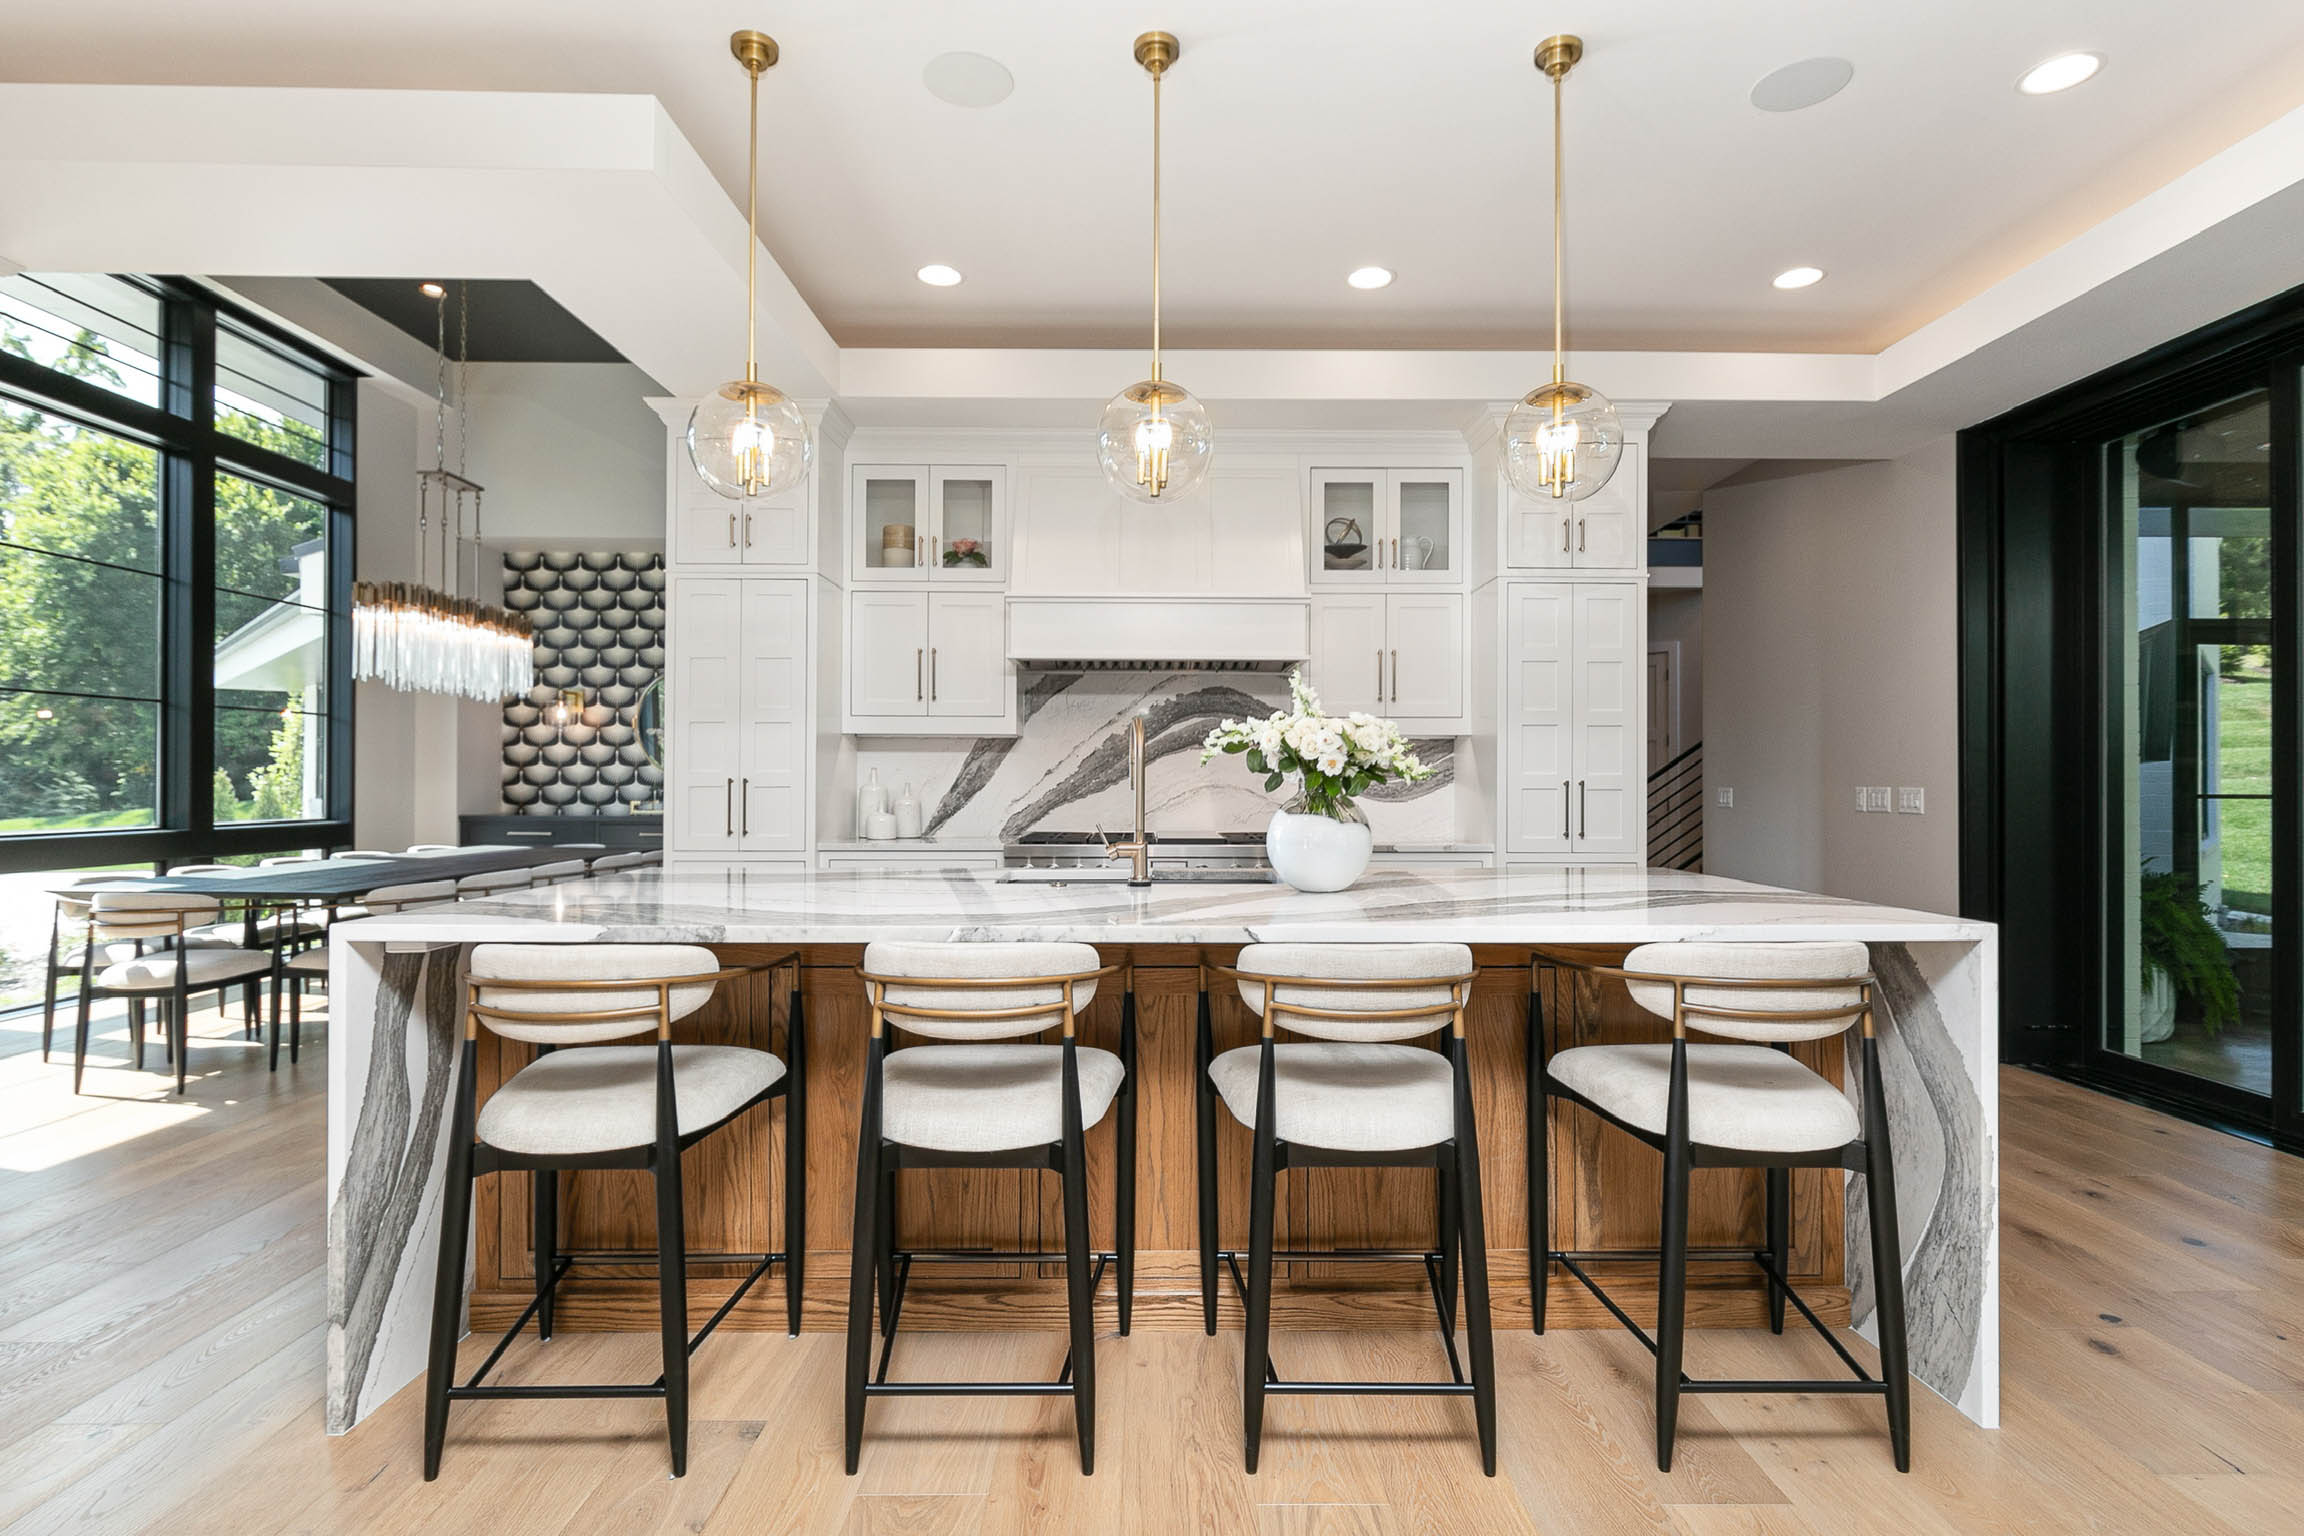 A kitchen counter with four white barstools, three pendant lights, white cabinets, and a marble backsplash